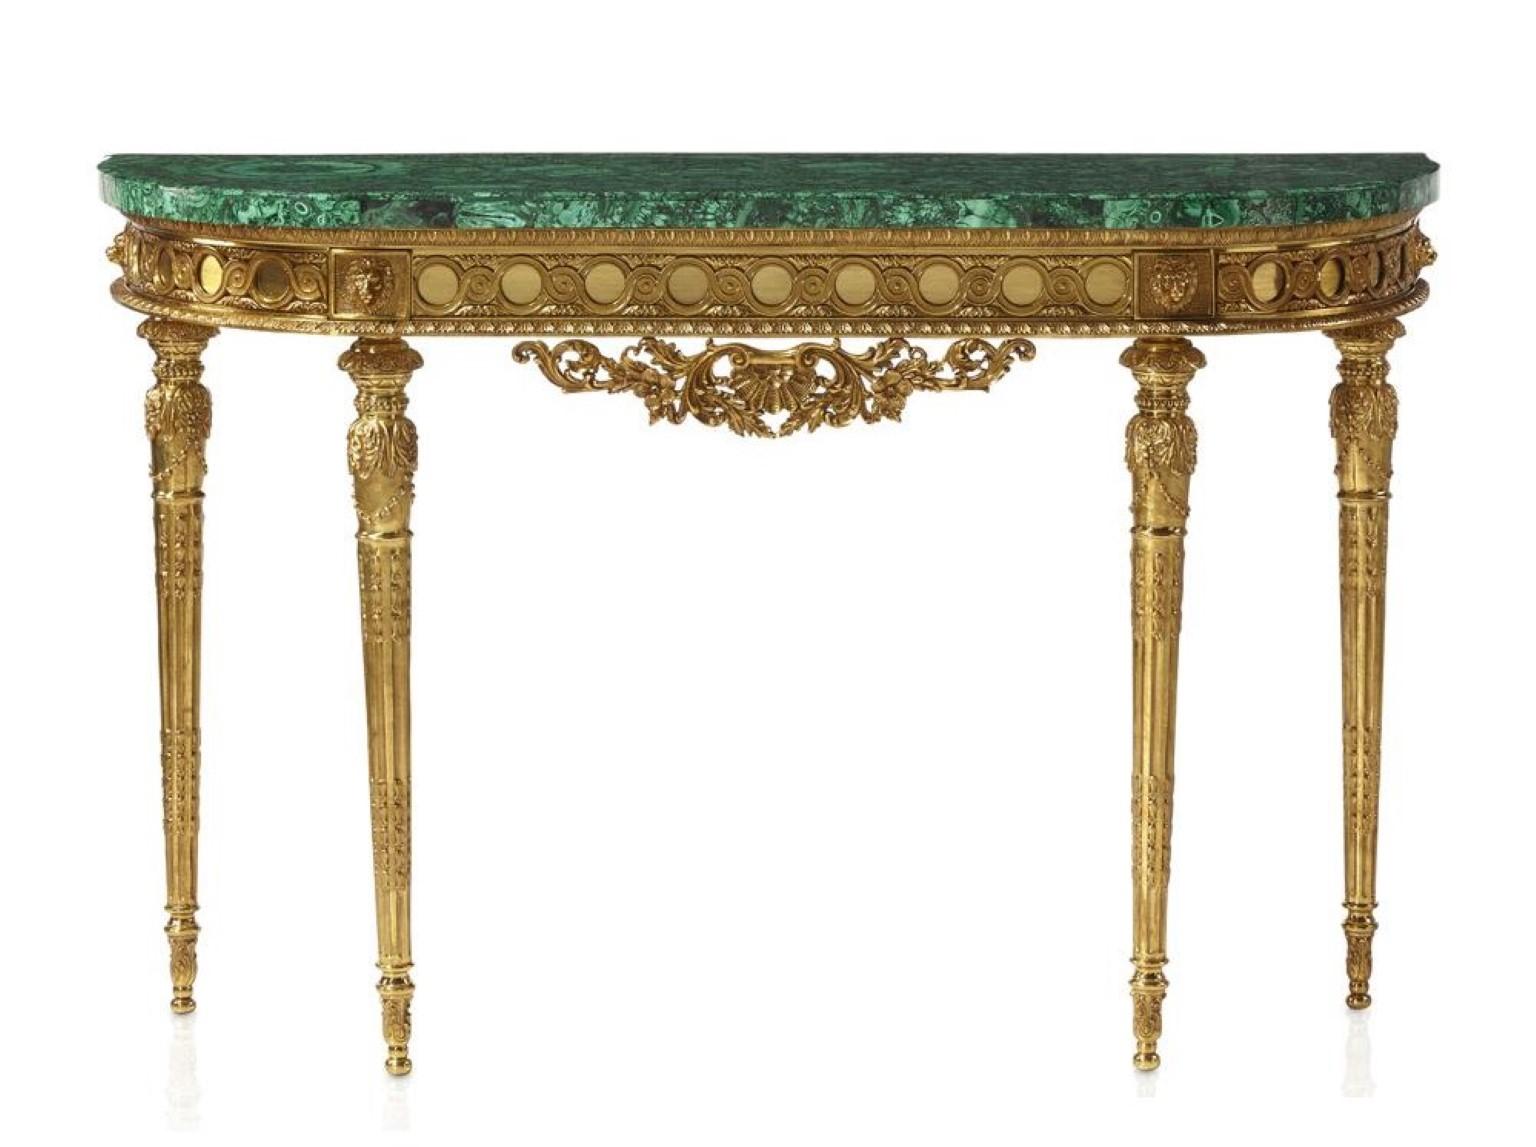 Bronze porch table with Malachite by ARTISS
Dimensions: L 137 x W 42 x H 88 cm
Materials: malachite, bronze

ARTIS is named from artist, whose two -S